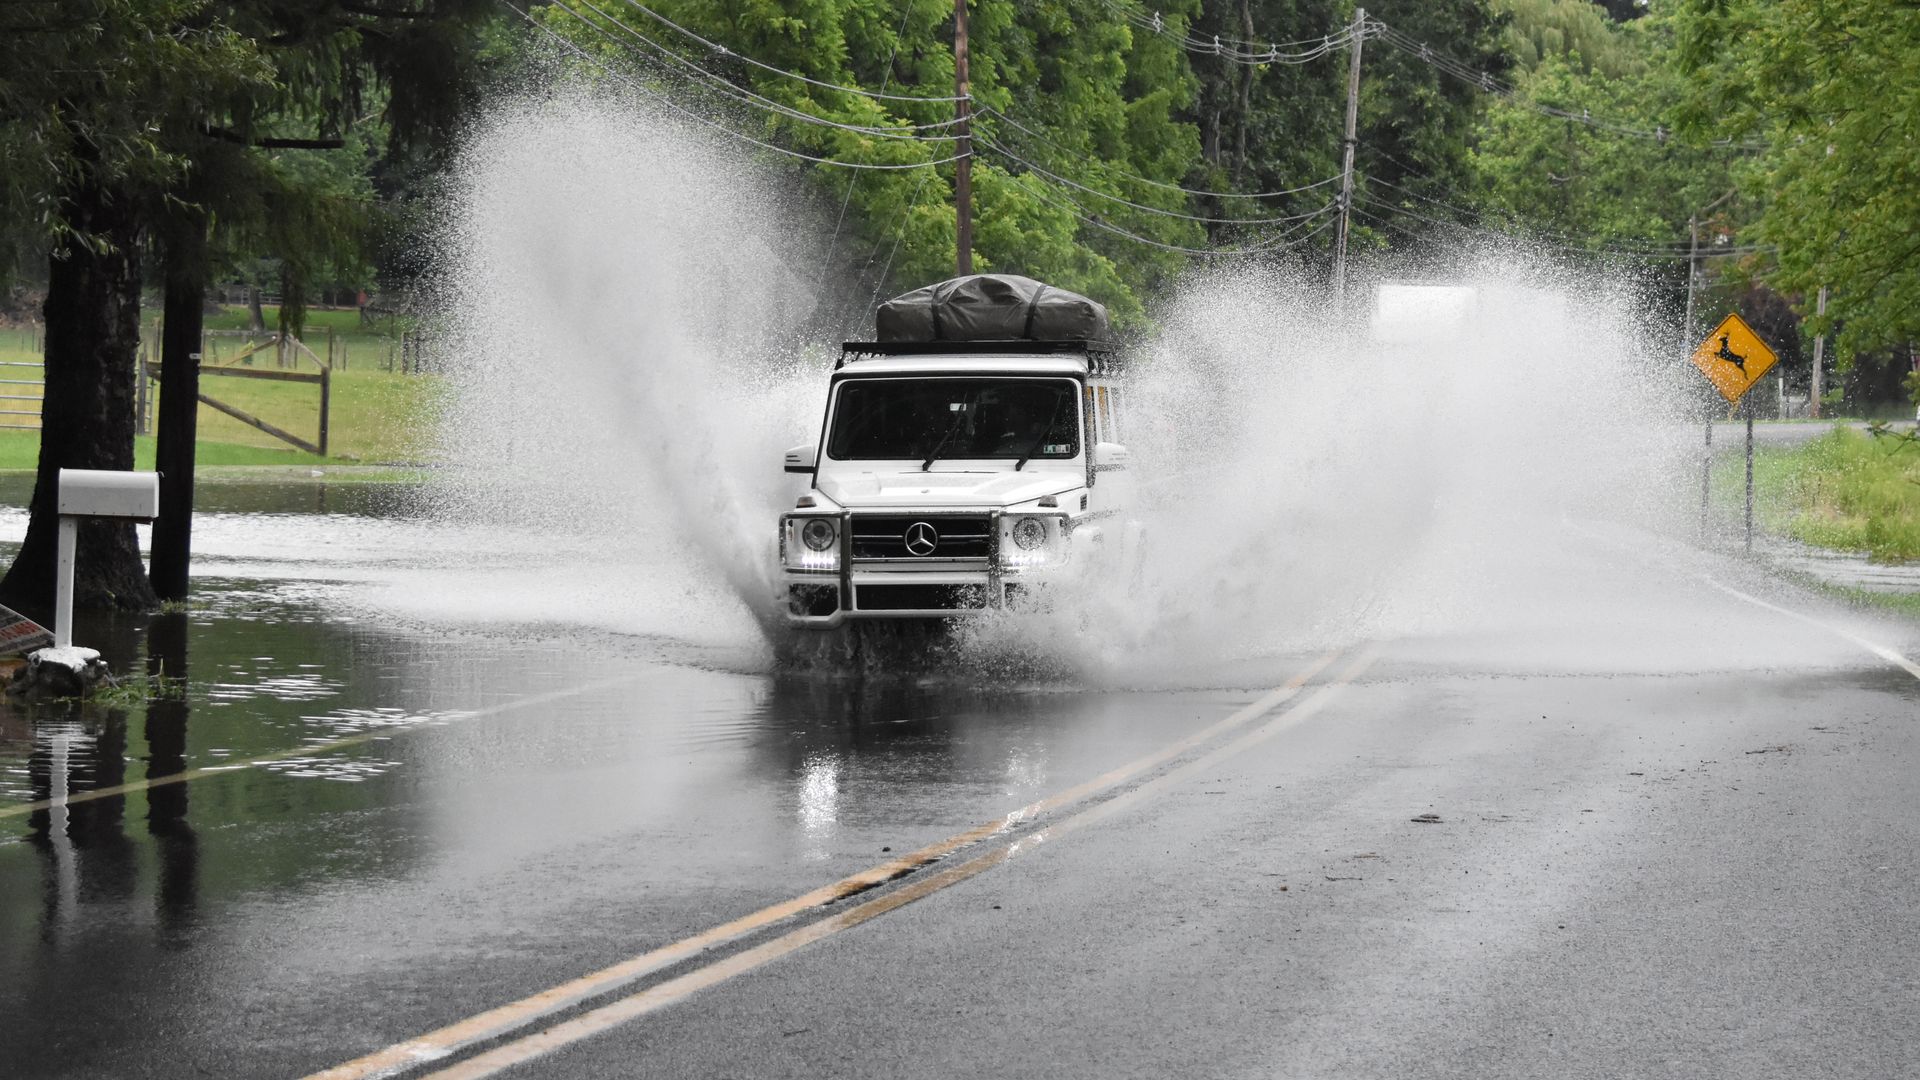 For the second time in a week, storms in the Northeast led to deadly flooding and travel headaches. Five people in Pennsylvania were killed.